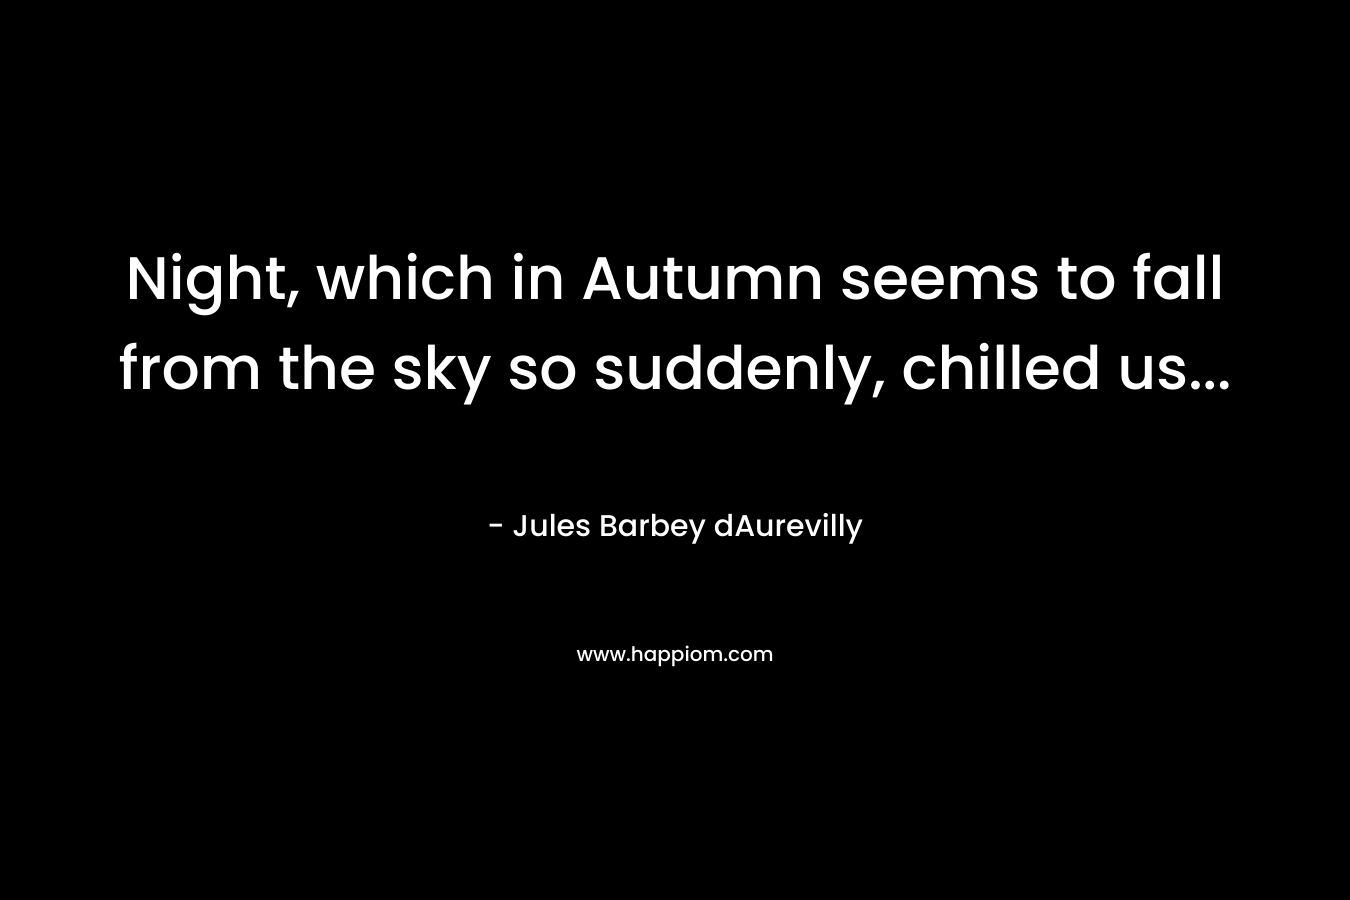 Night, which in Autumn seems to fall from the sky so suddenly, chilled us… – Jules Barbey dAurevilly